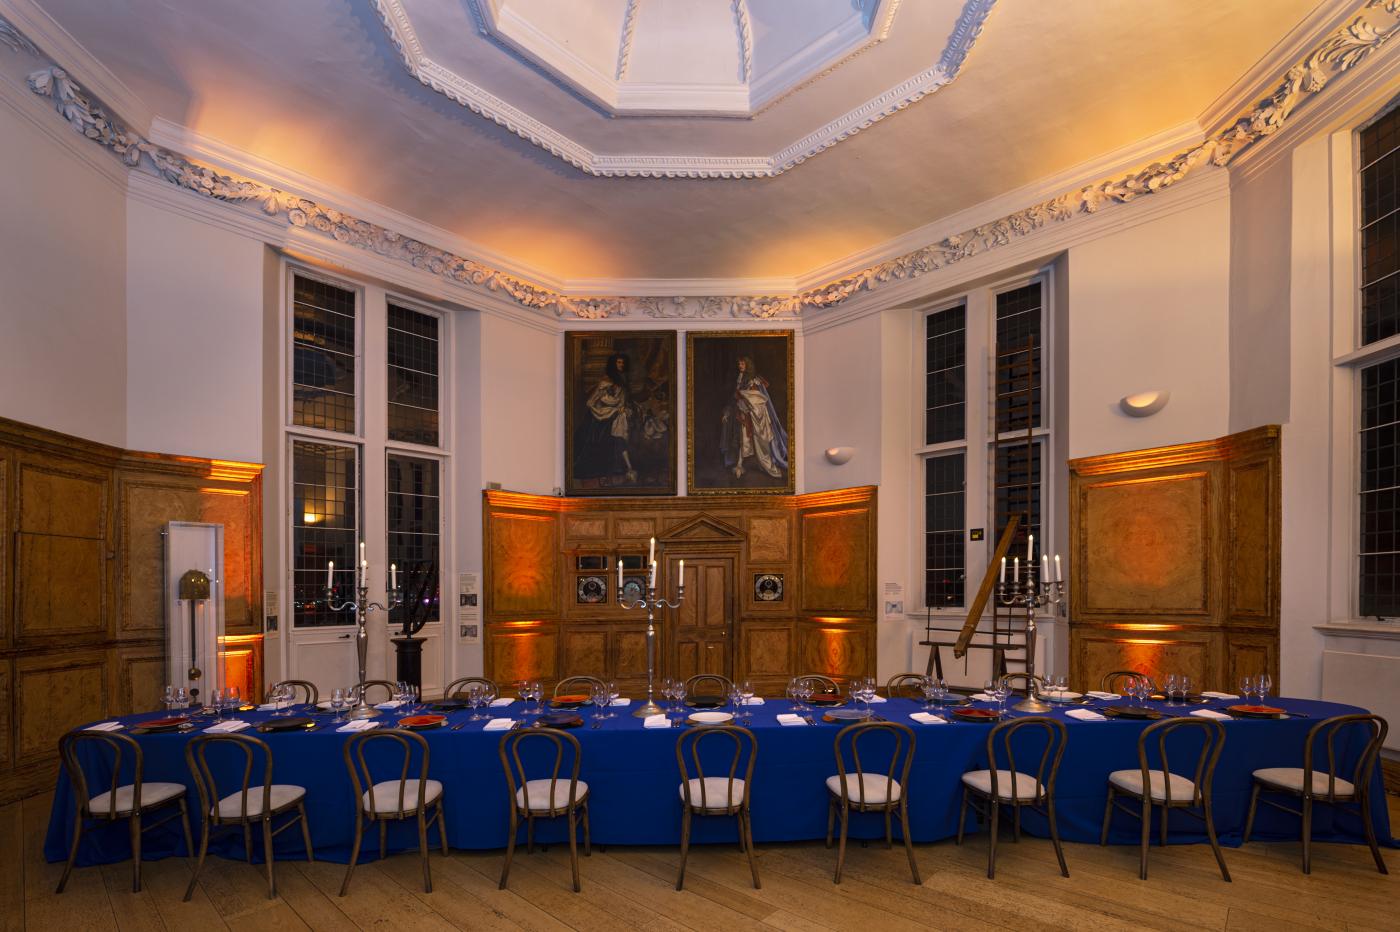 An image showing 'Octagon Room - Flamsteed House'